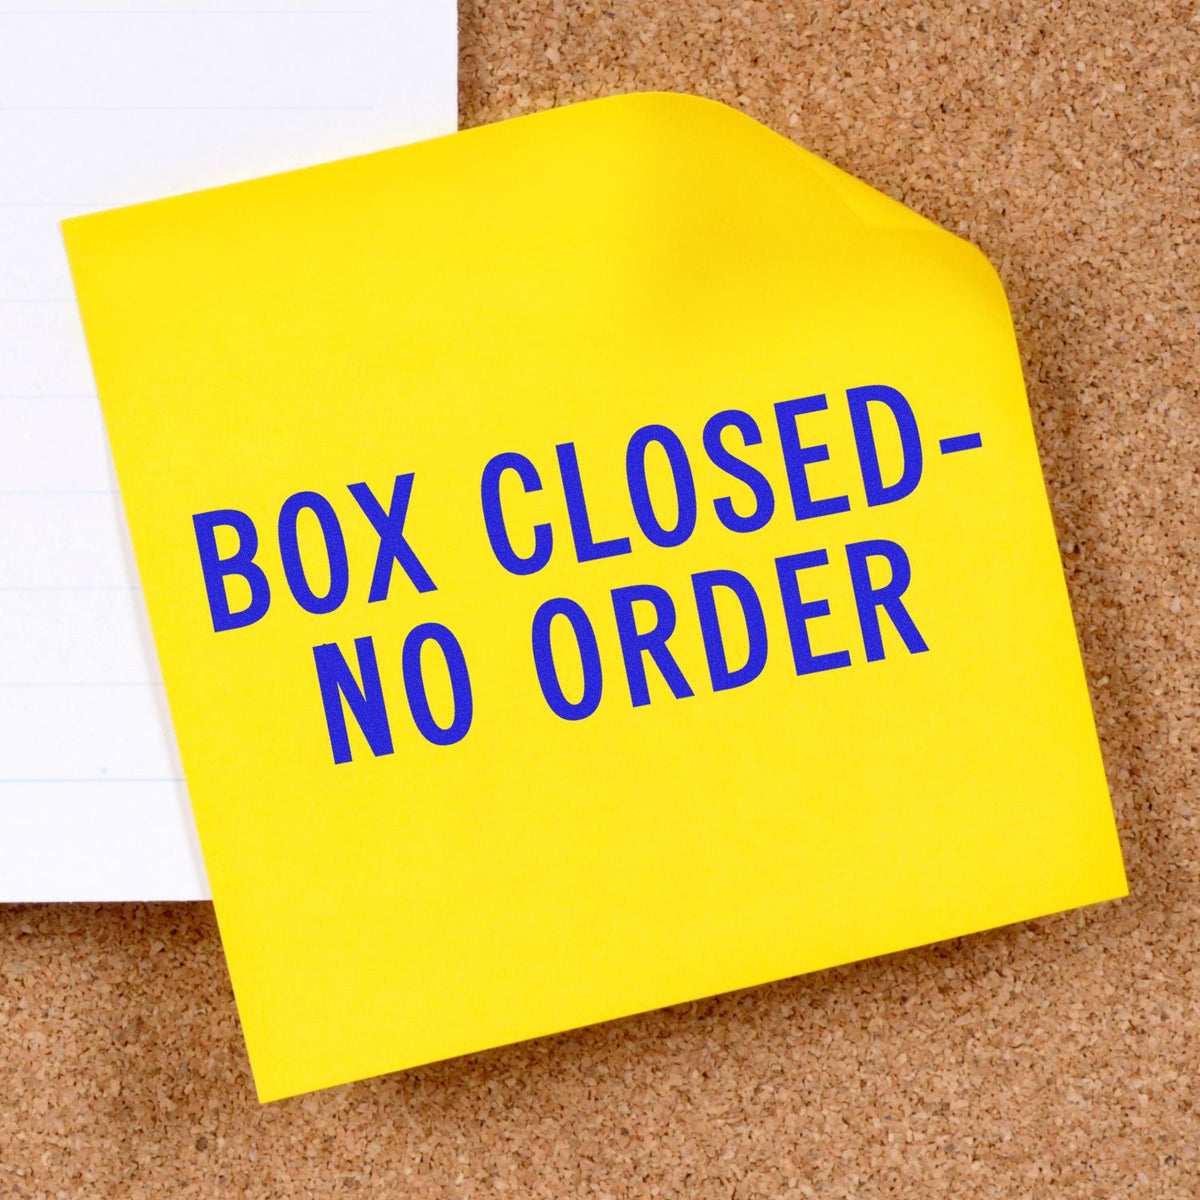 Large Self-Inking Box Closed No Order Stamp In Use Photo